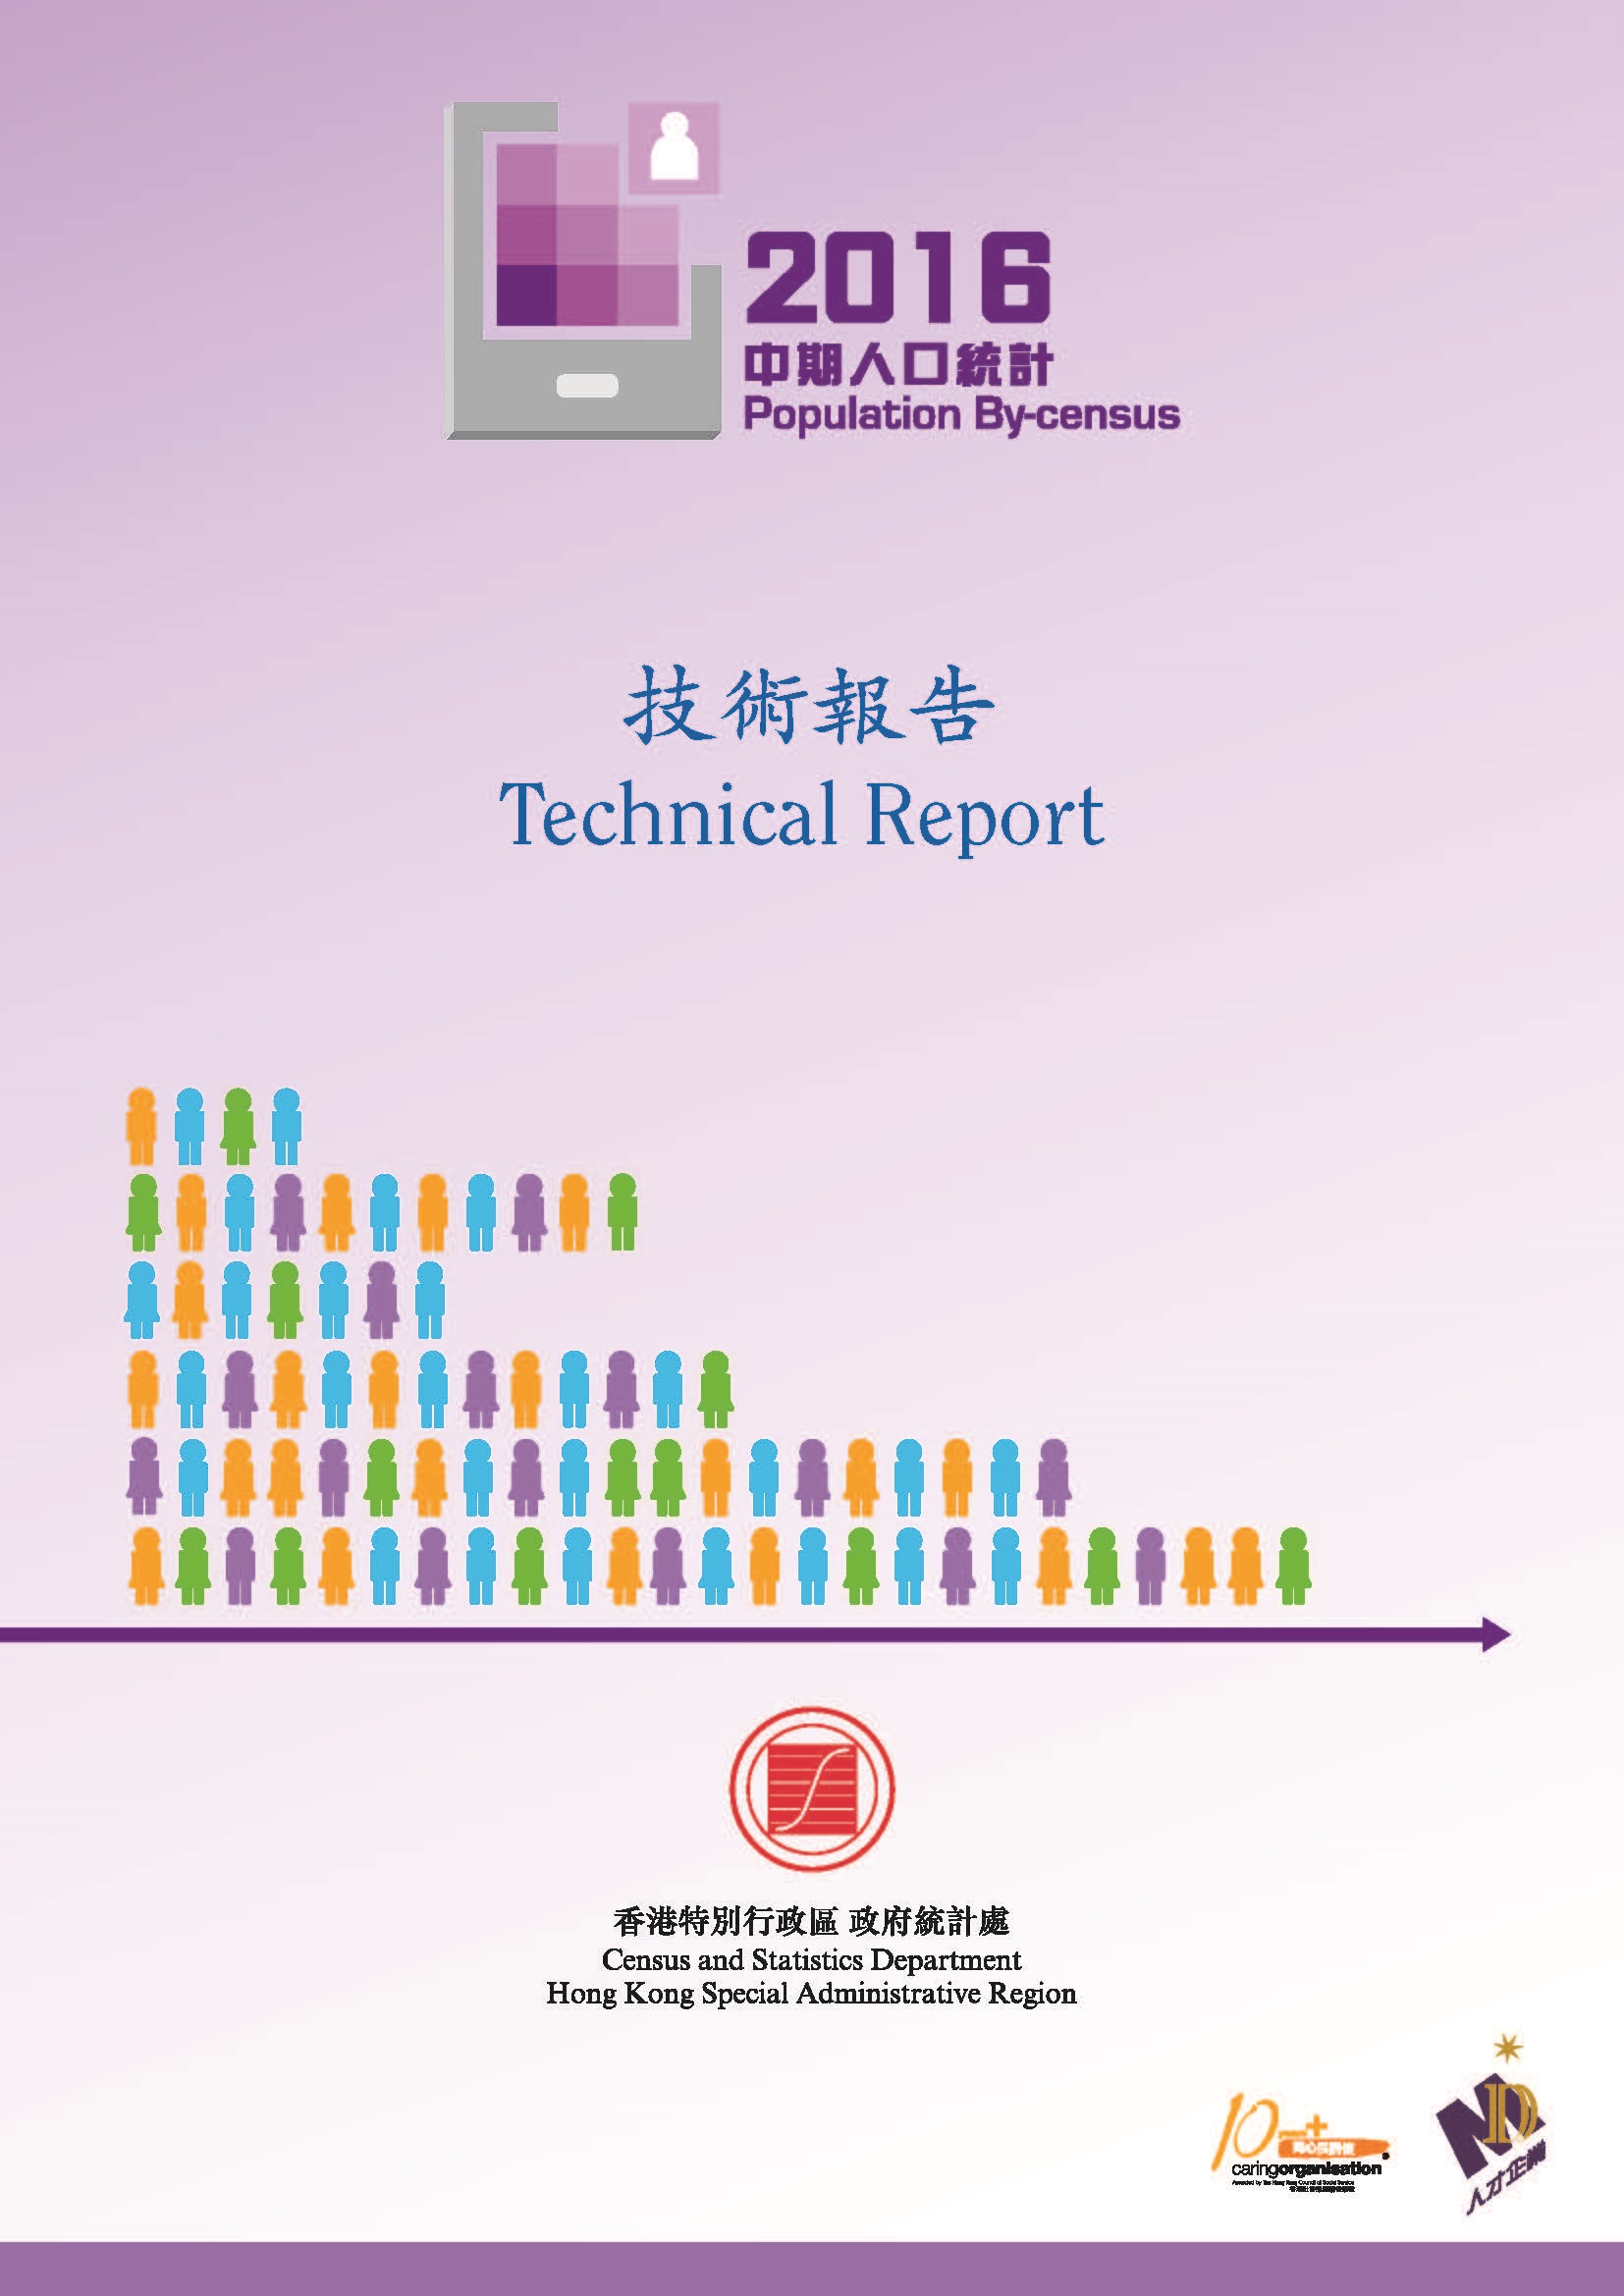 2016 Population By-census - Technical Report